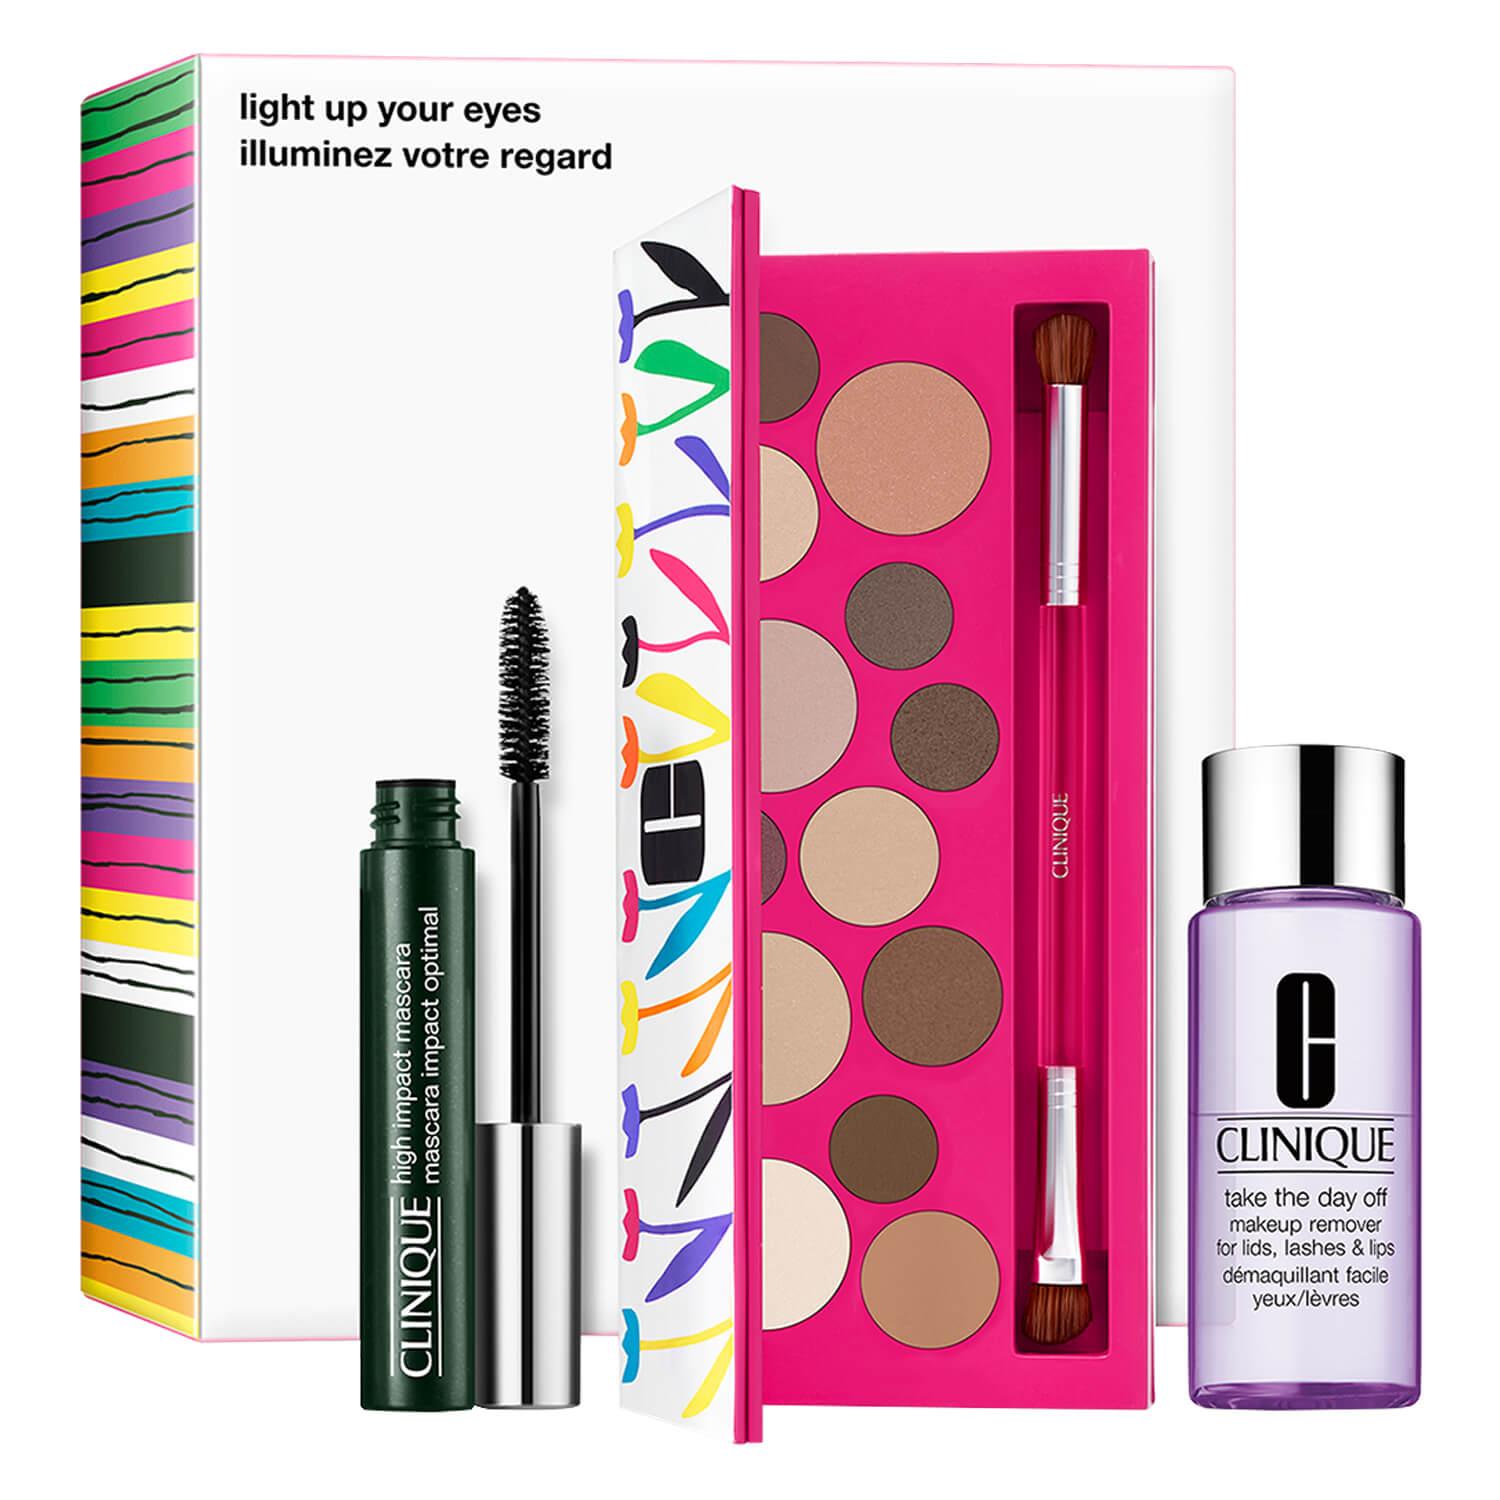 Clinique Set - Light Up Your Eyes